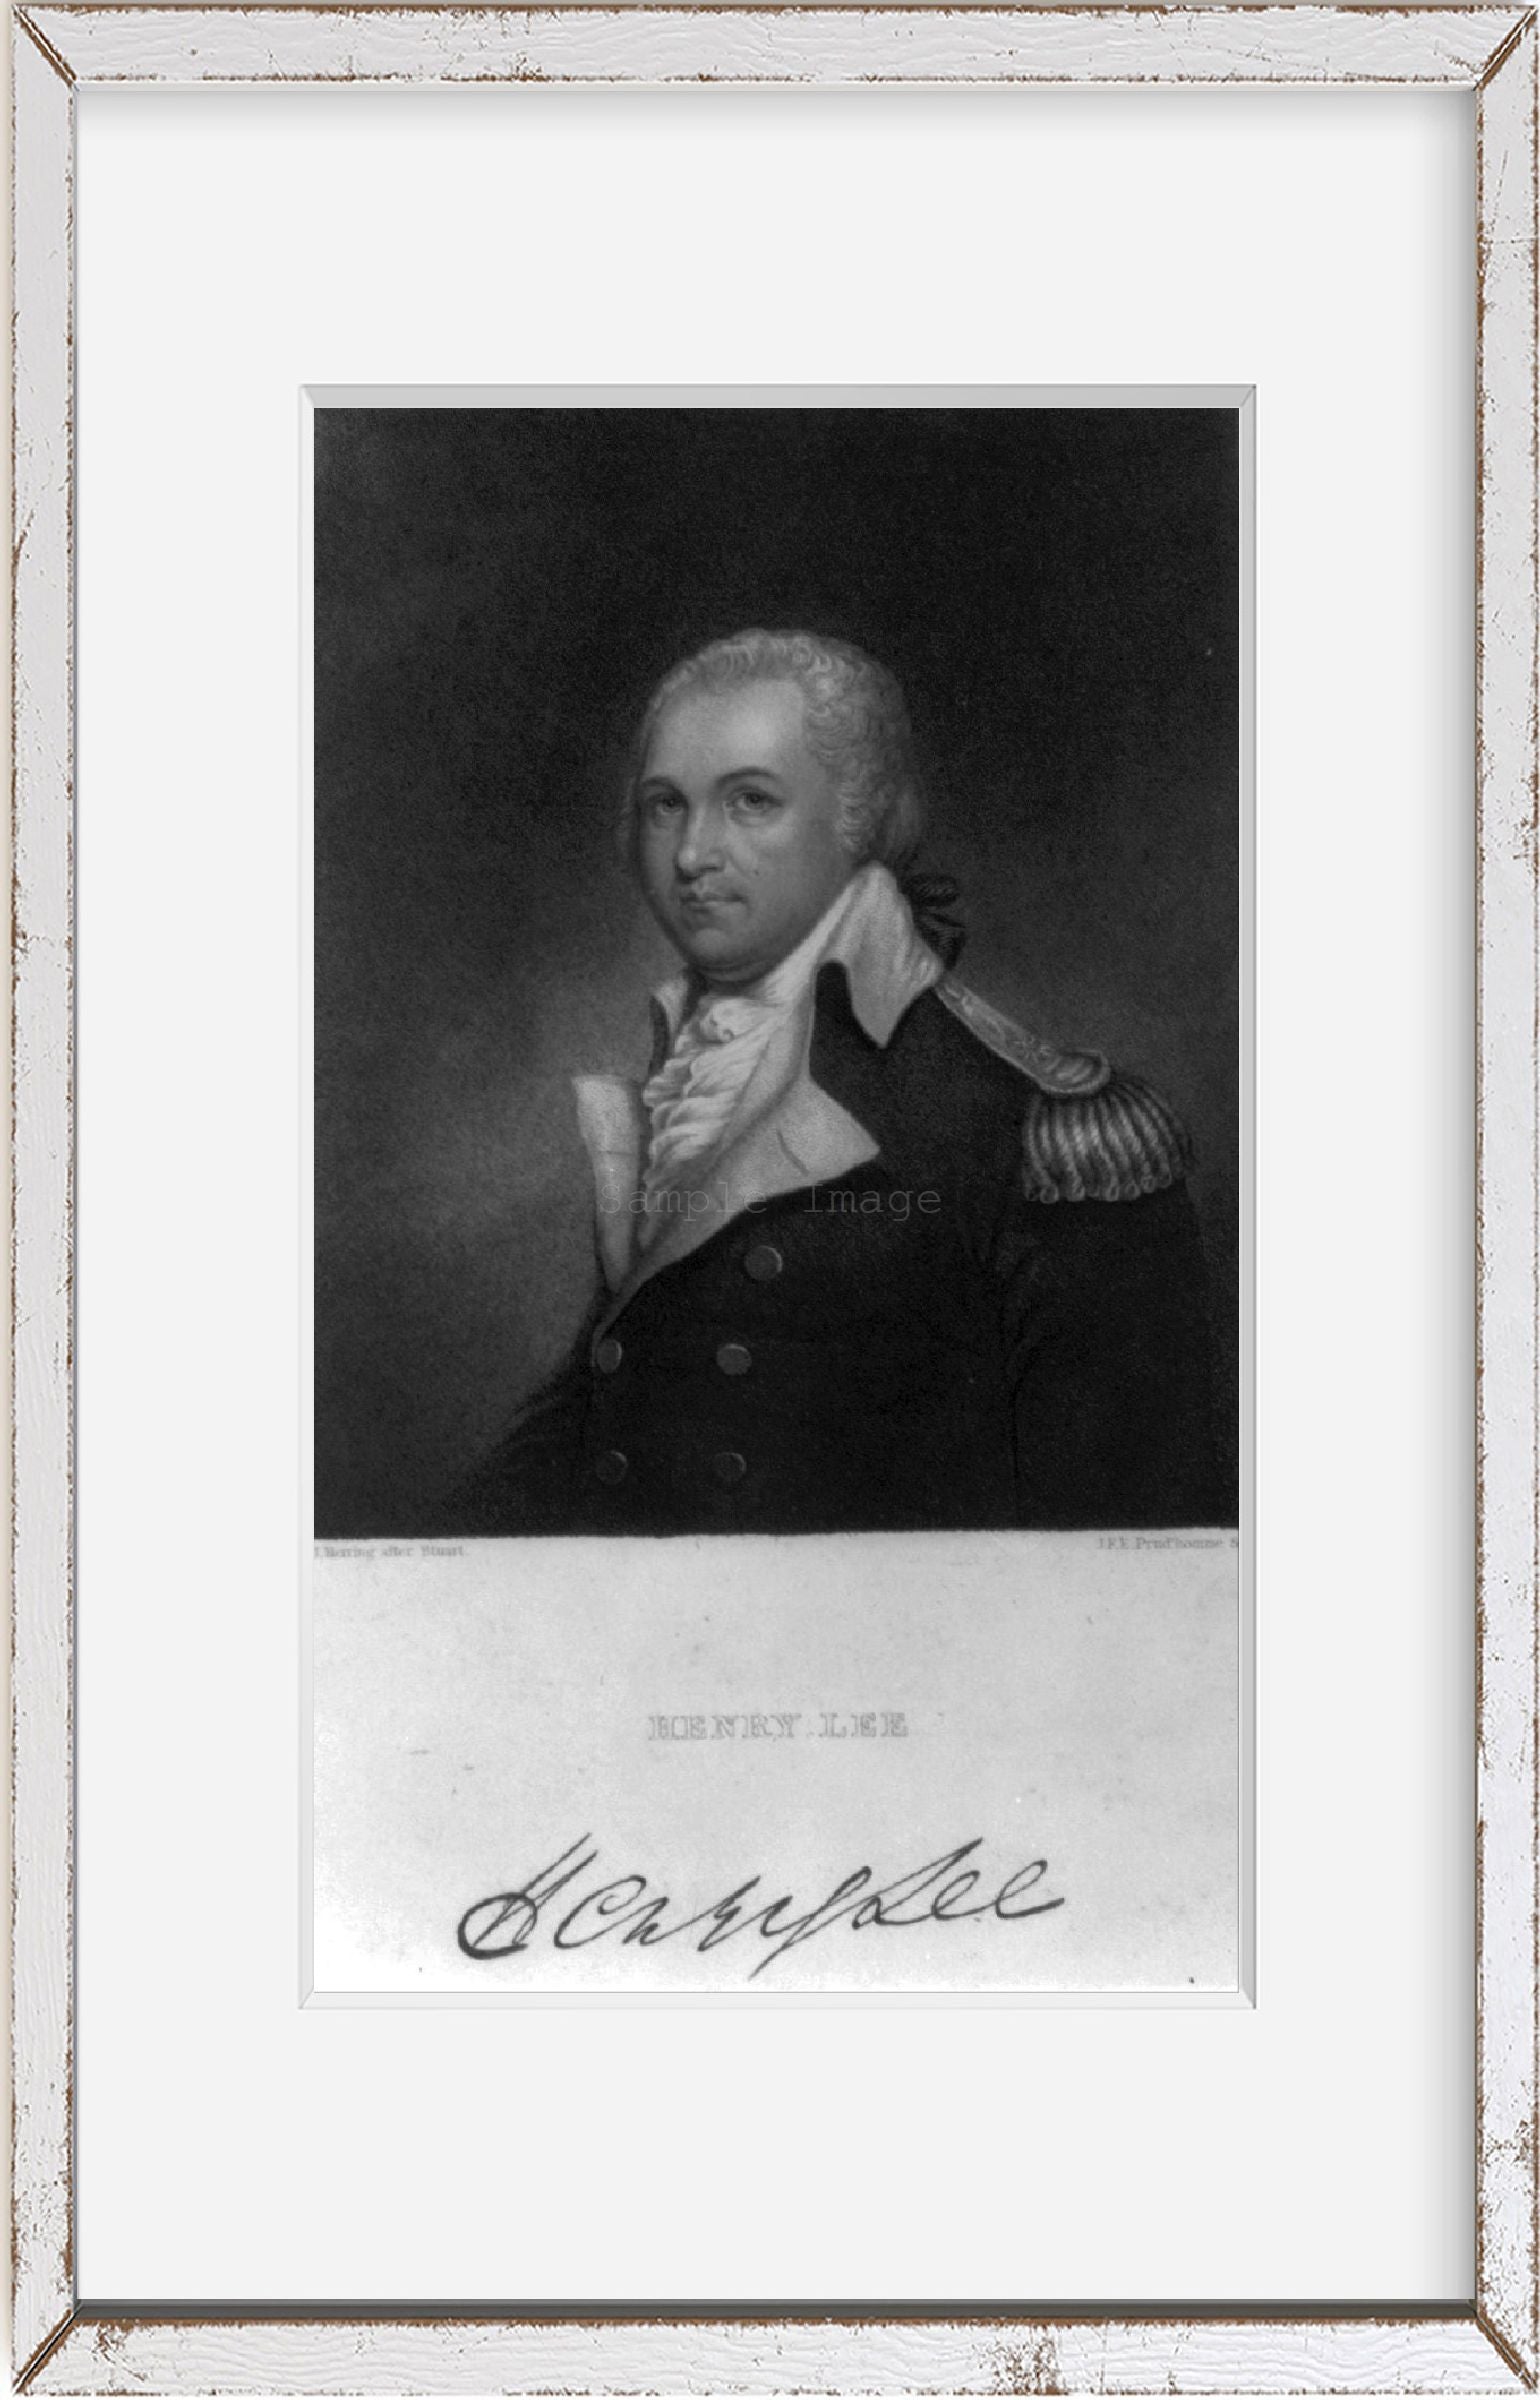 1809 photograph of Henry Lee